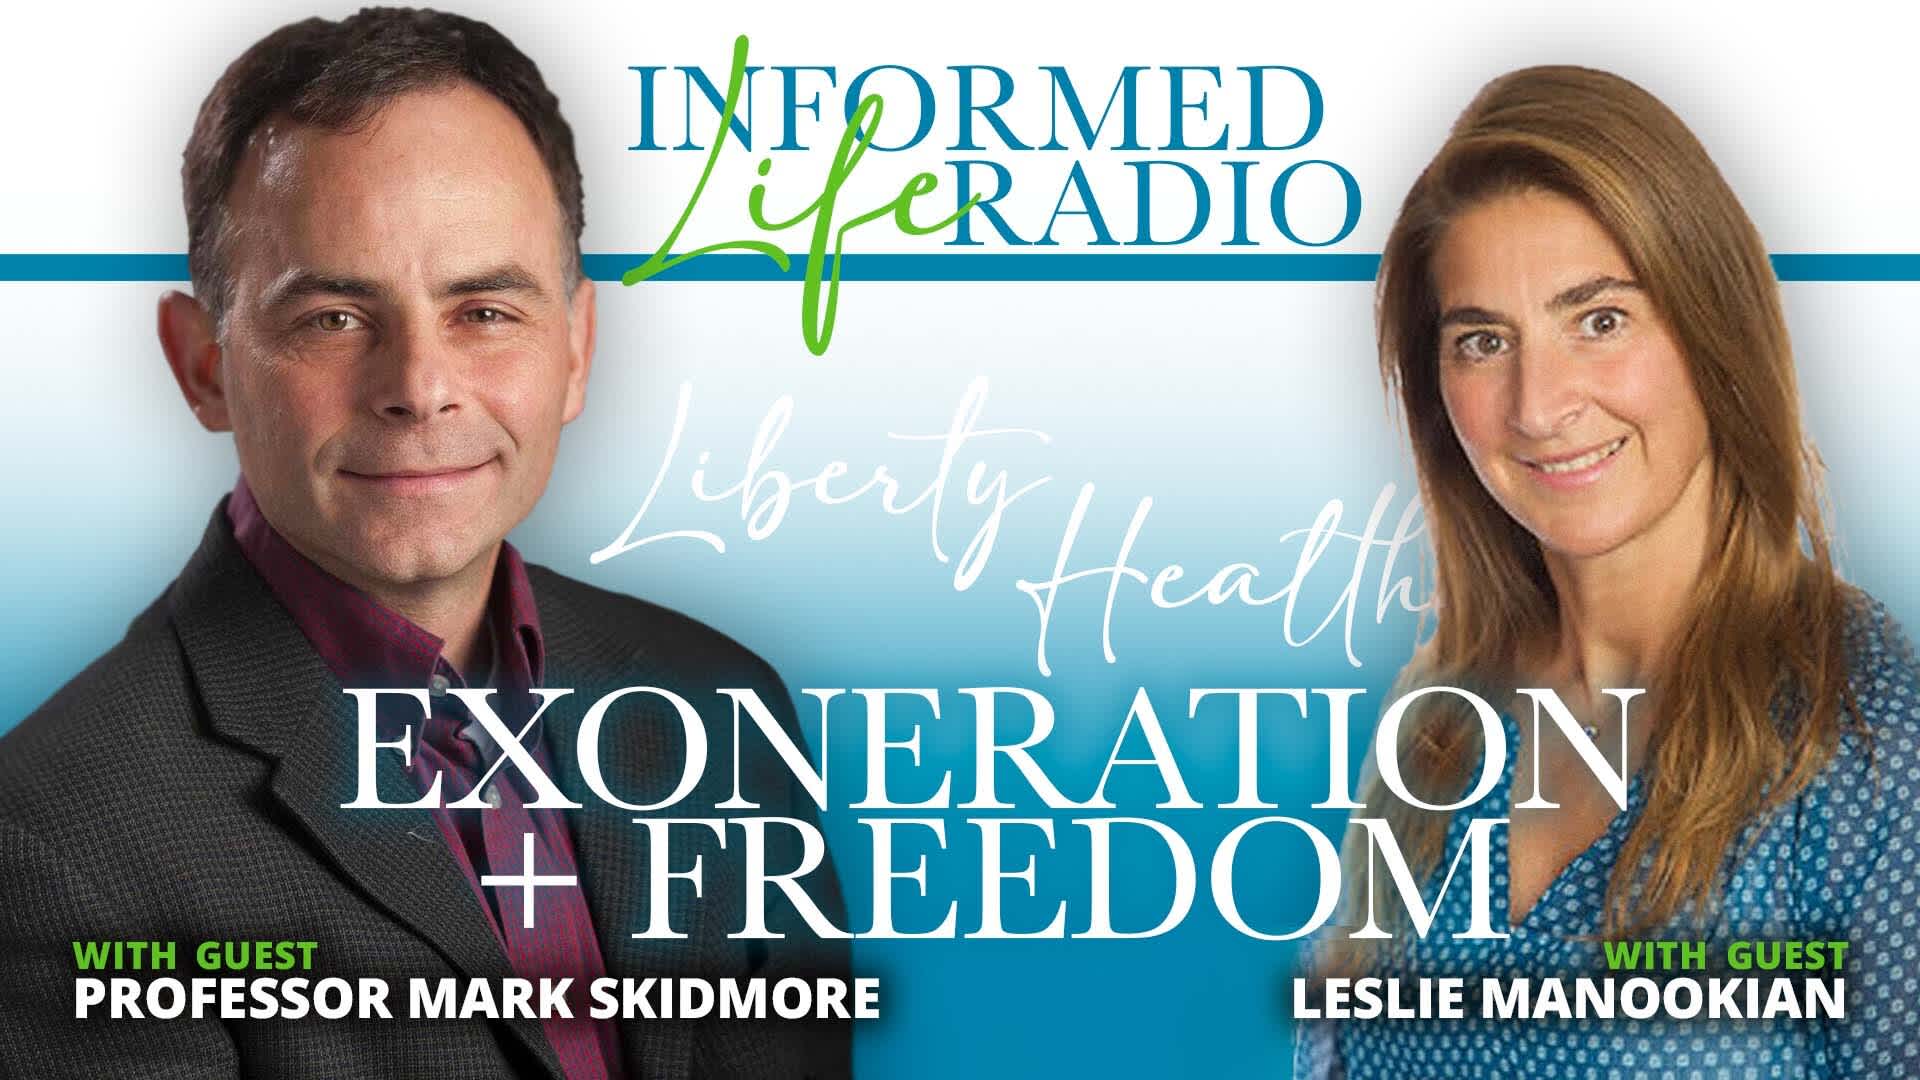 Exoneration + Freedom with Guests Mark Skidmore and Leslie Manookian